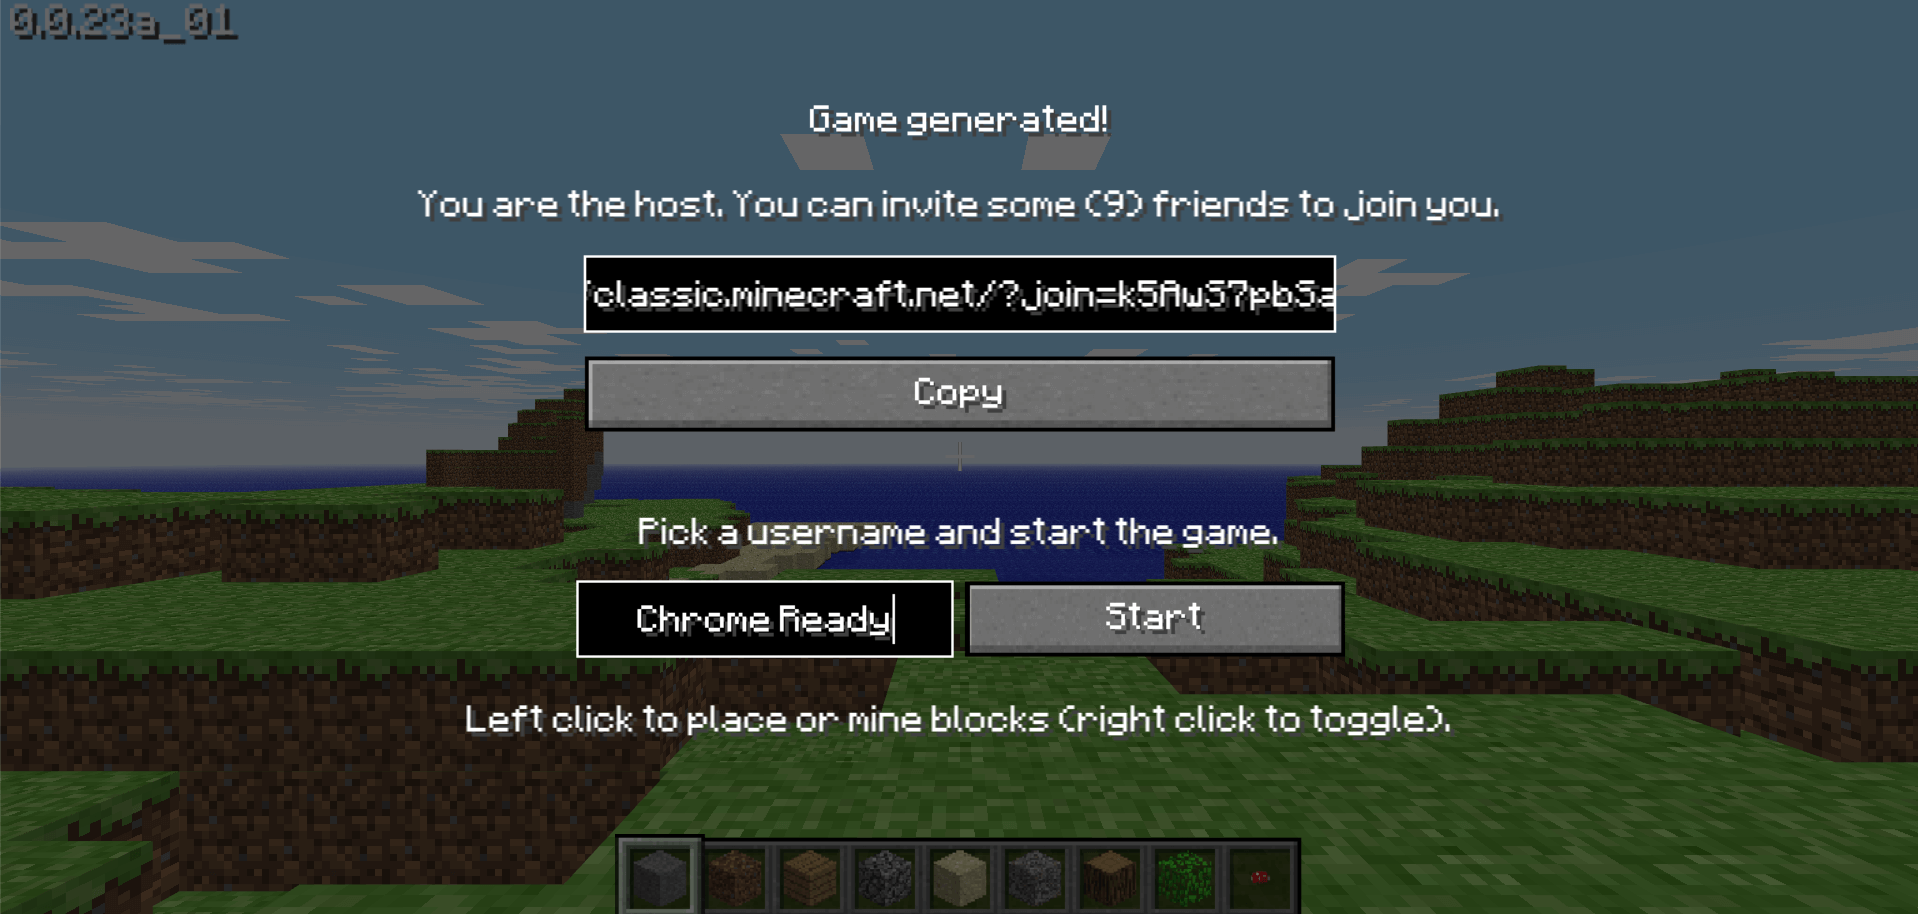 Choosing a username for Minecraft Classic